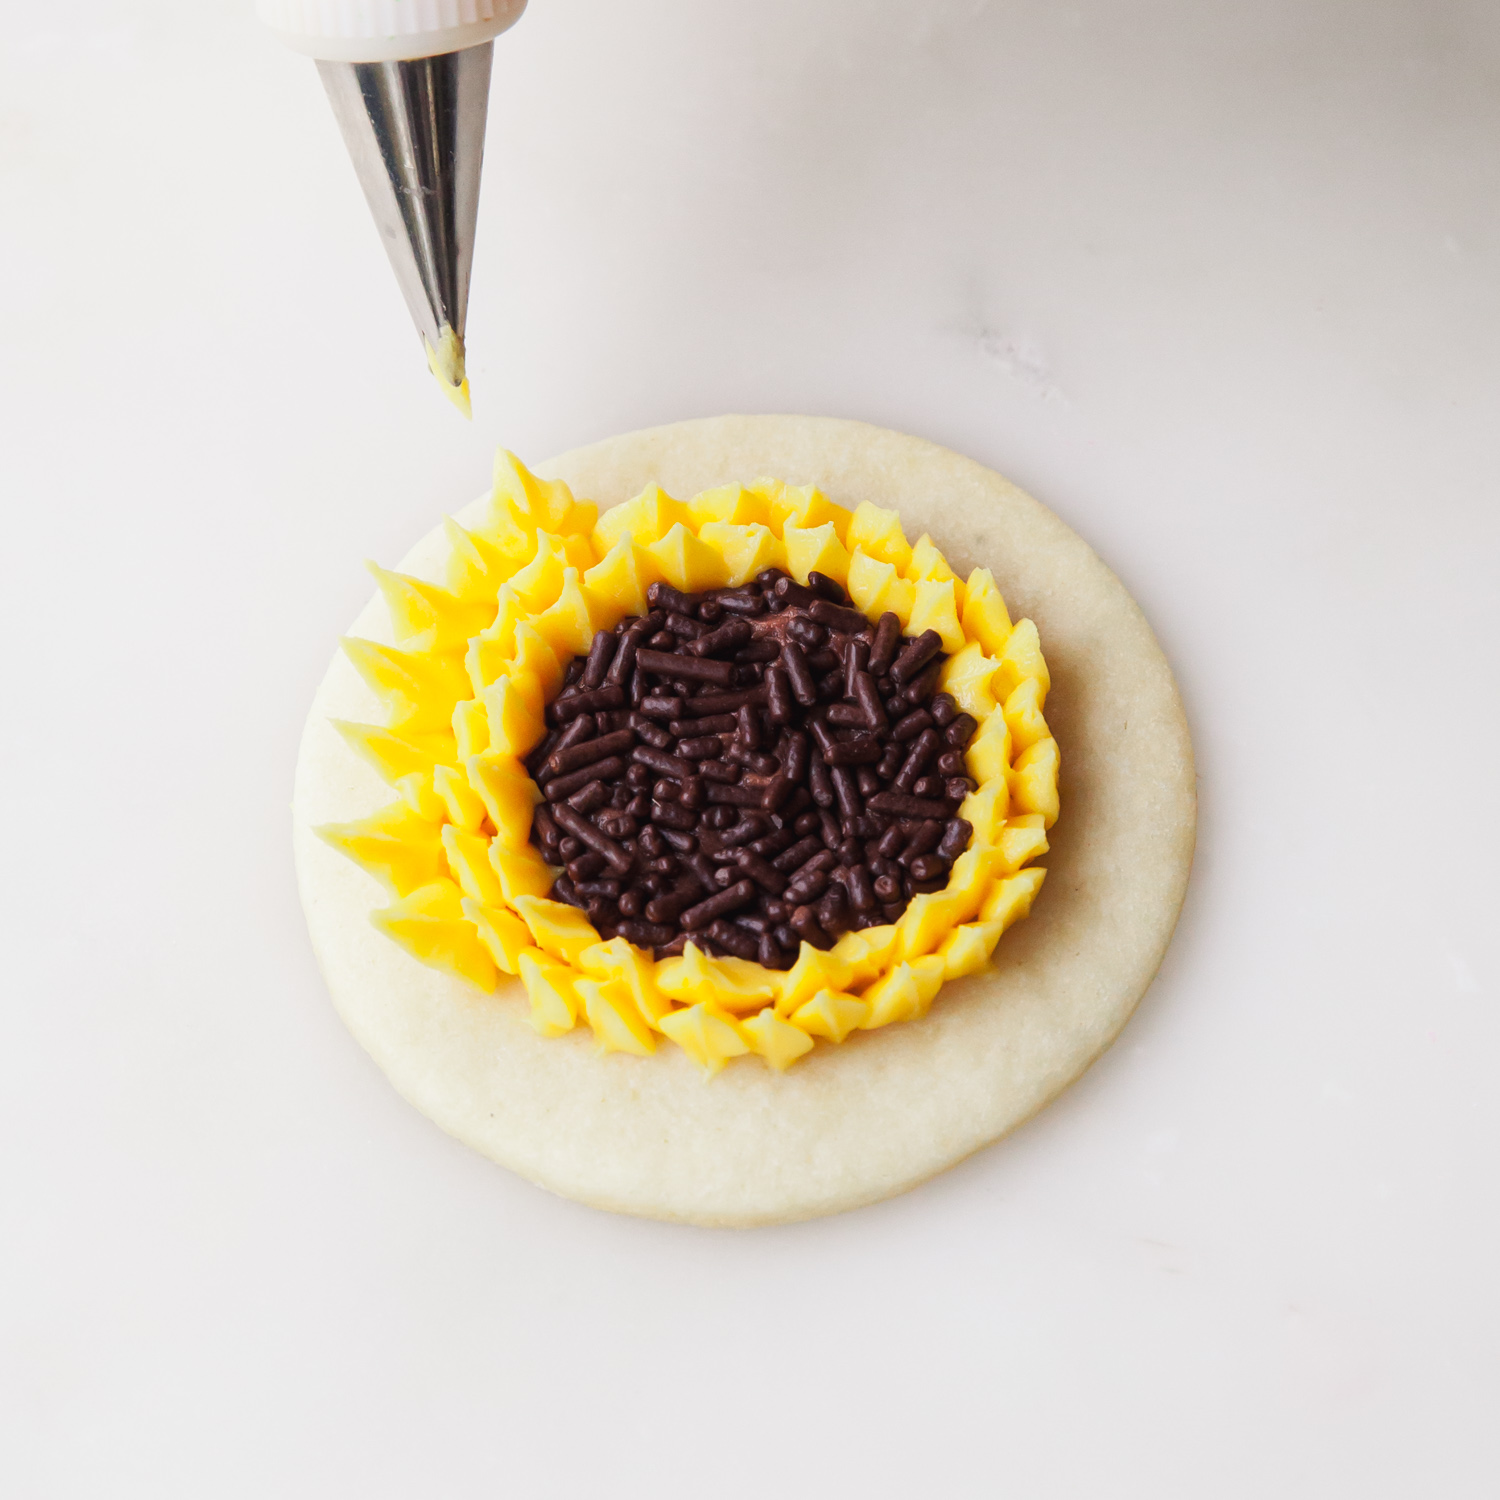 For the outer two rows of petals, angle the piping bag away from the center of the cookie so the petals begin to open up.